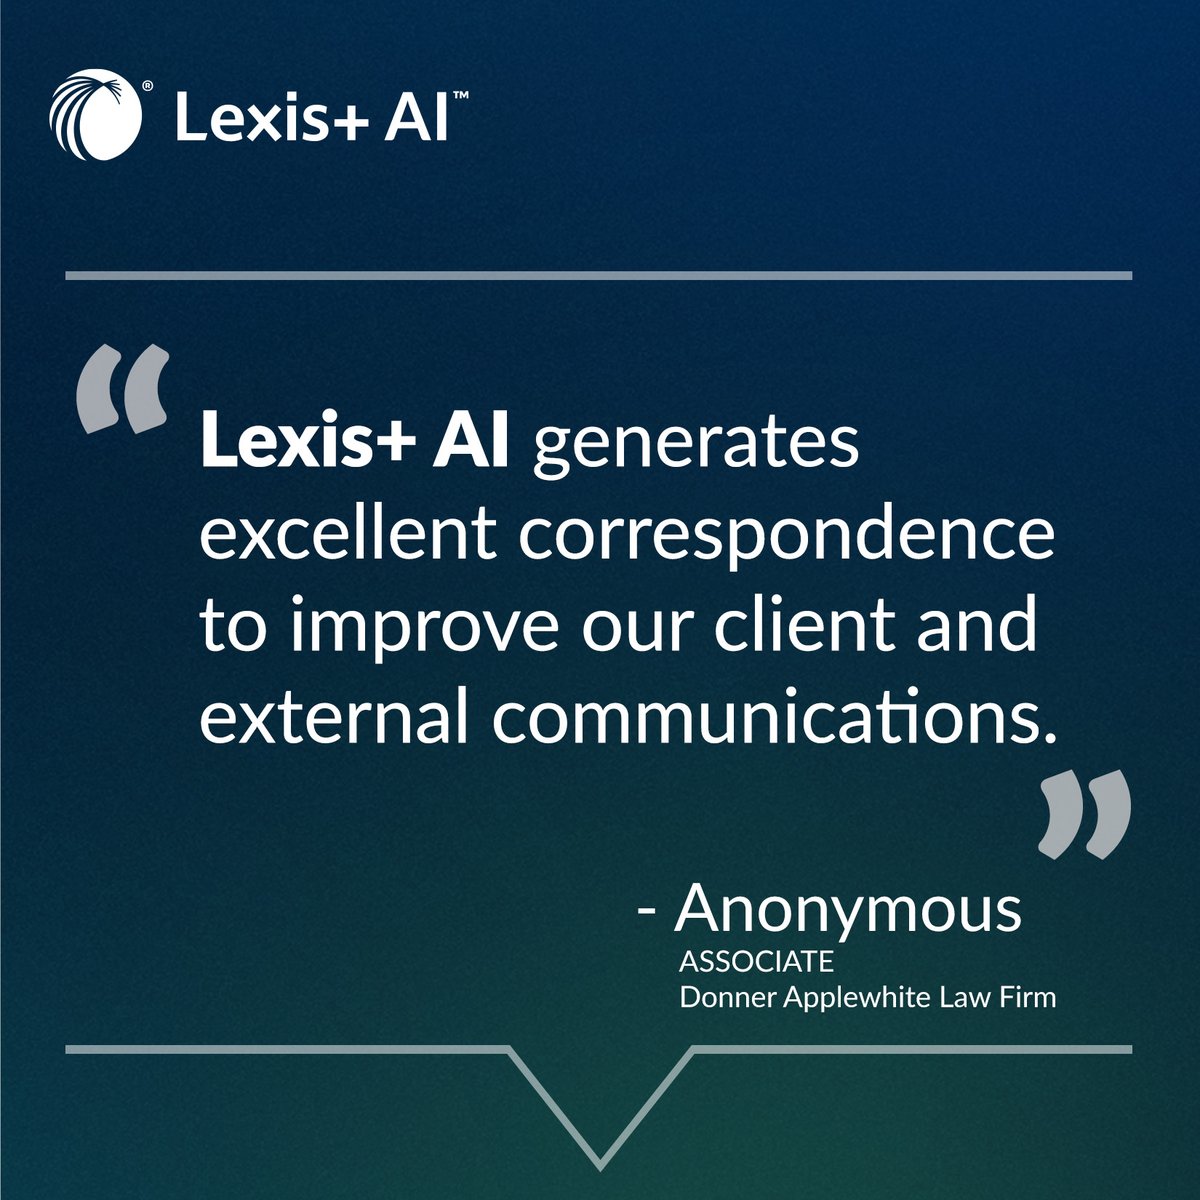 76% of respondents told us they save up to six hours a week using Lexis+ AI's drafting capabilities! Try it yourself and see how our 2nd-generation #LegalAI assistant can transform your legal work: bit.ly/LexisPlusAI #LexisNexis #LegalTech #AI #LegalAI